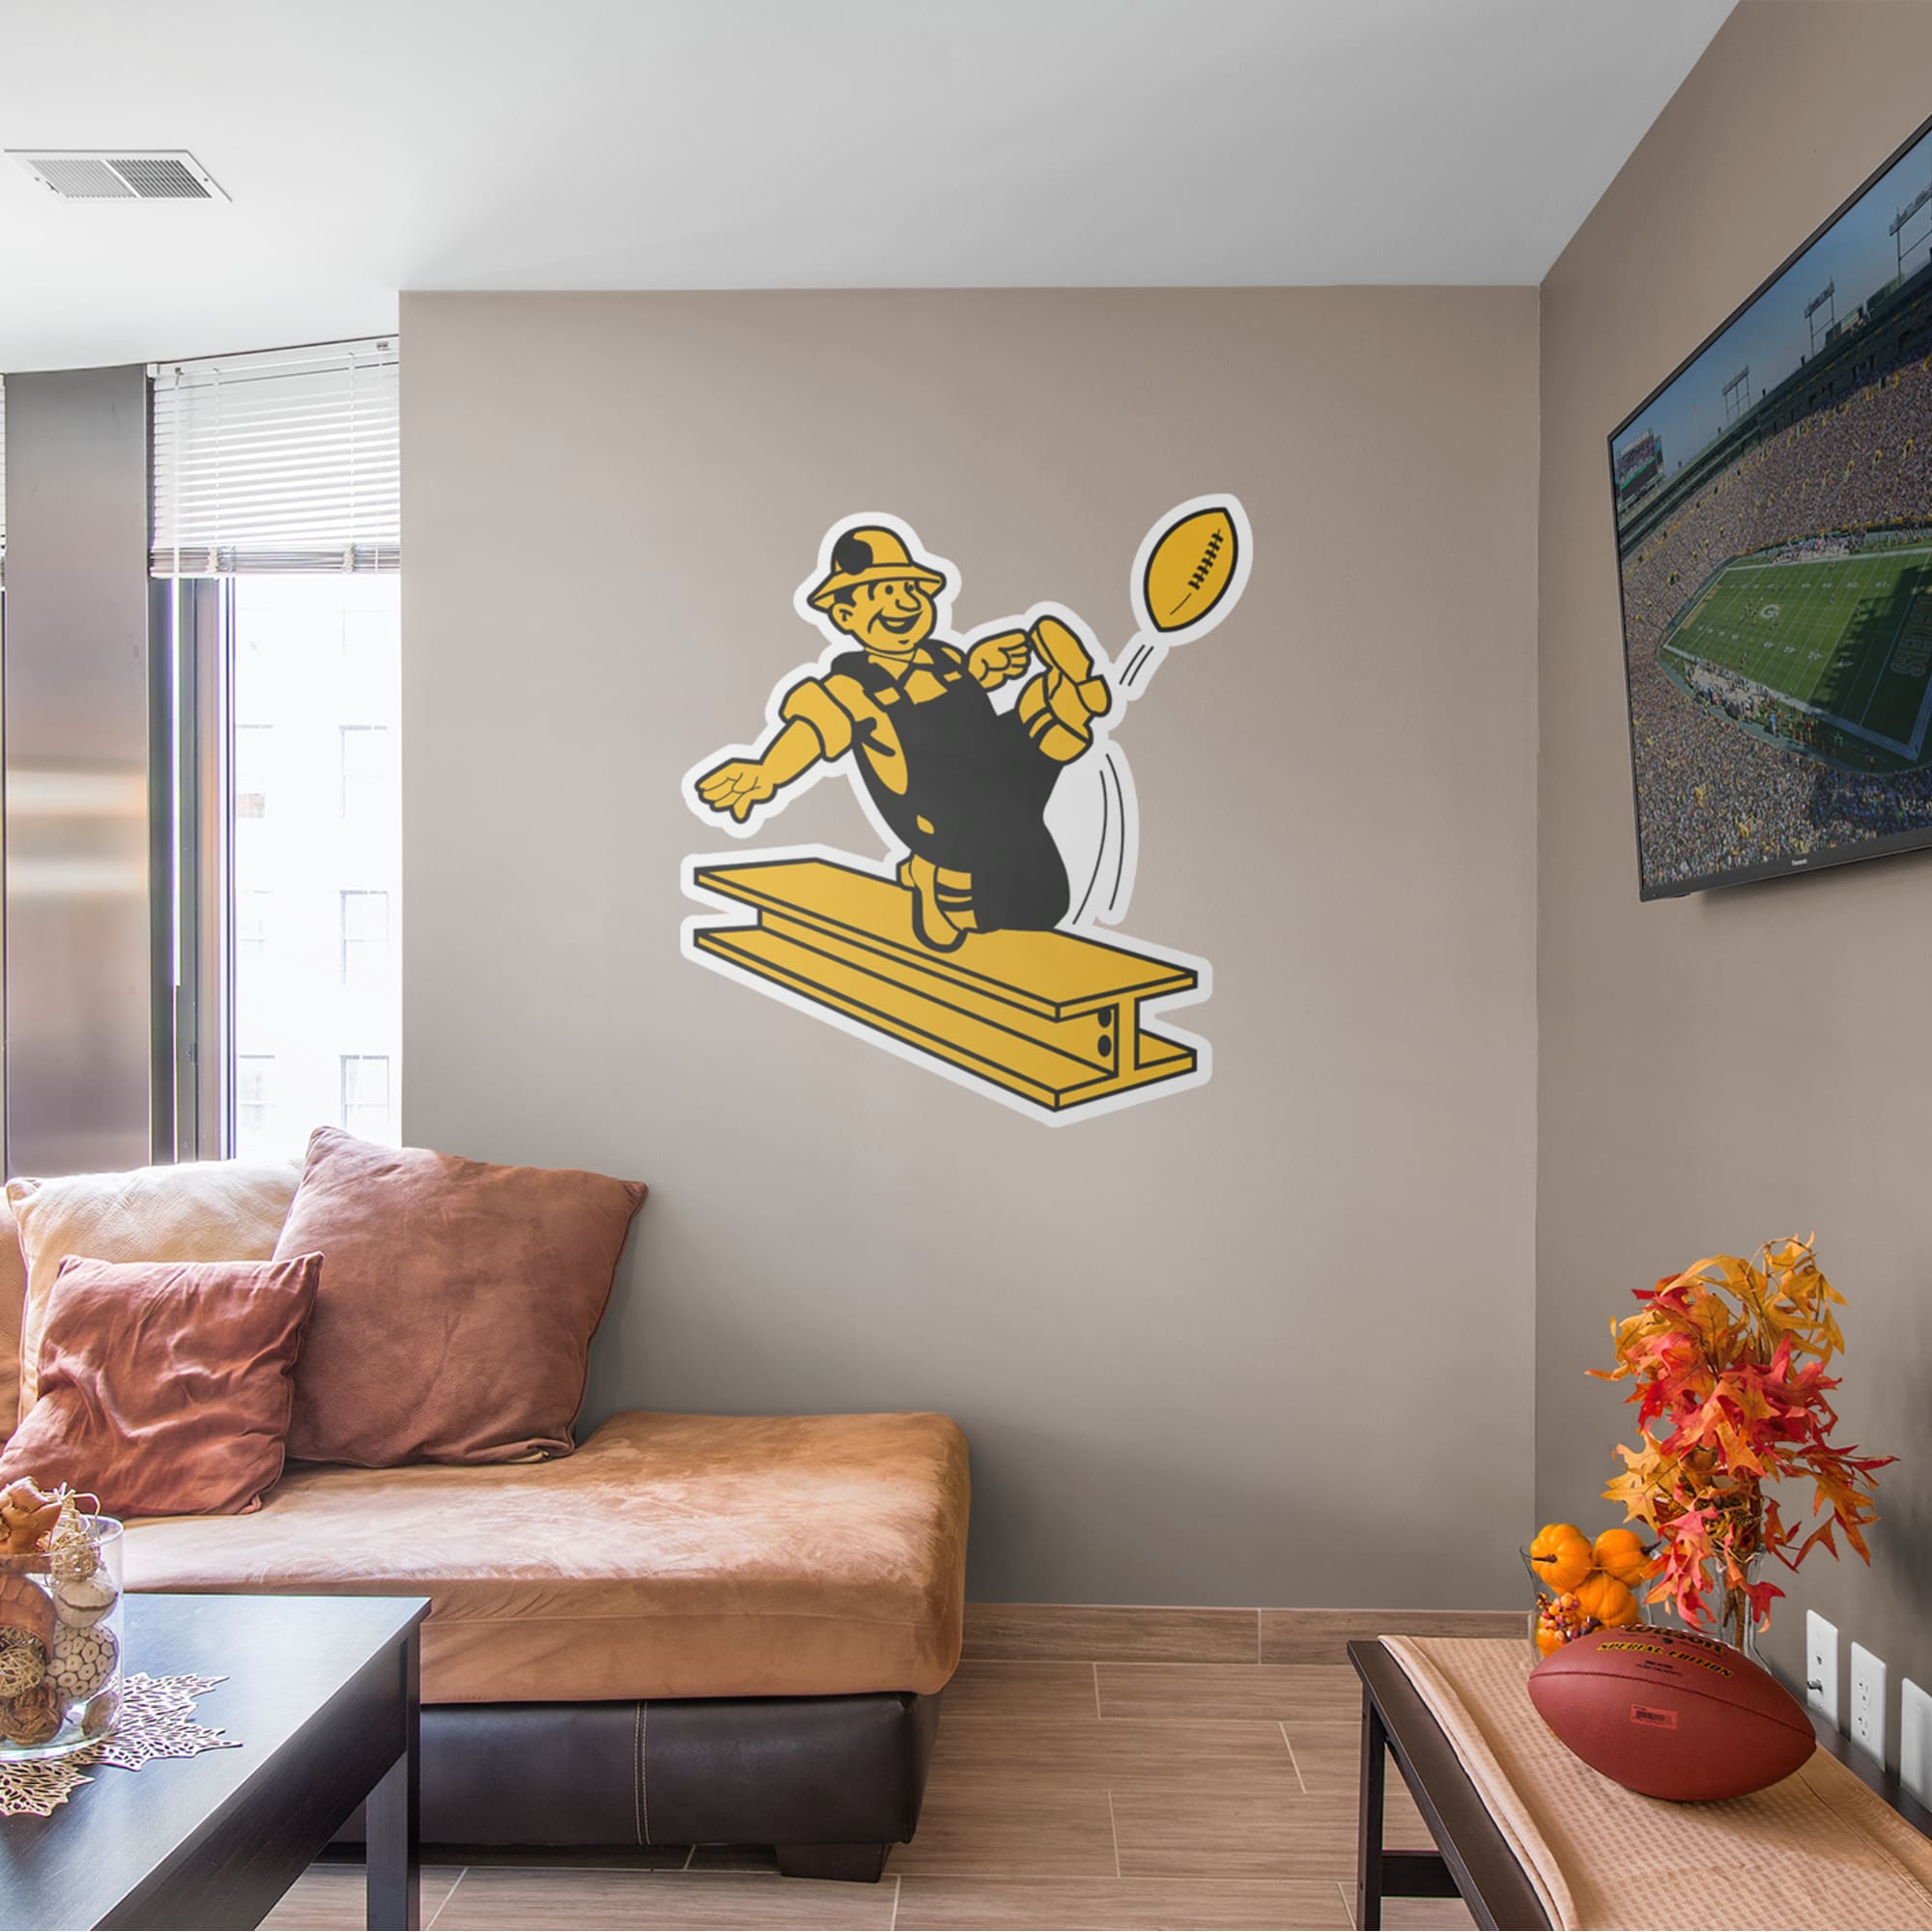 Pittsburgh Steelers: Classic Logo - Officially Licensed NFL Removable Wall Decal 40.0"W x 44.0"H by Fathead | Vinyl